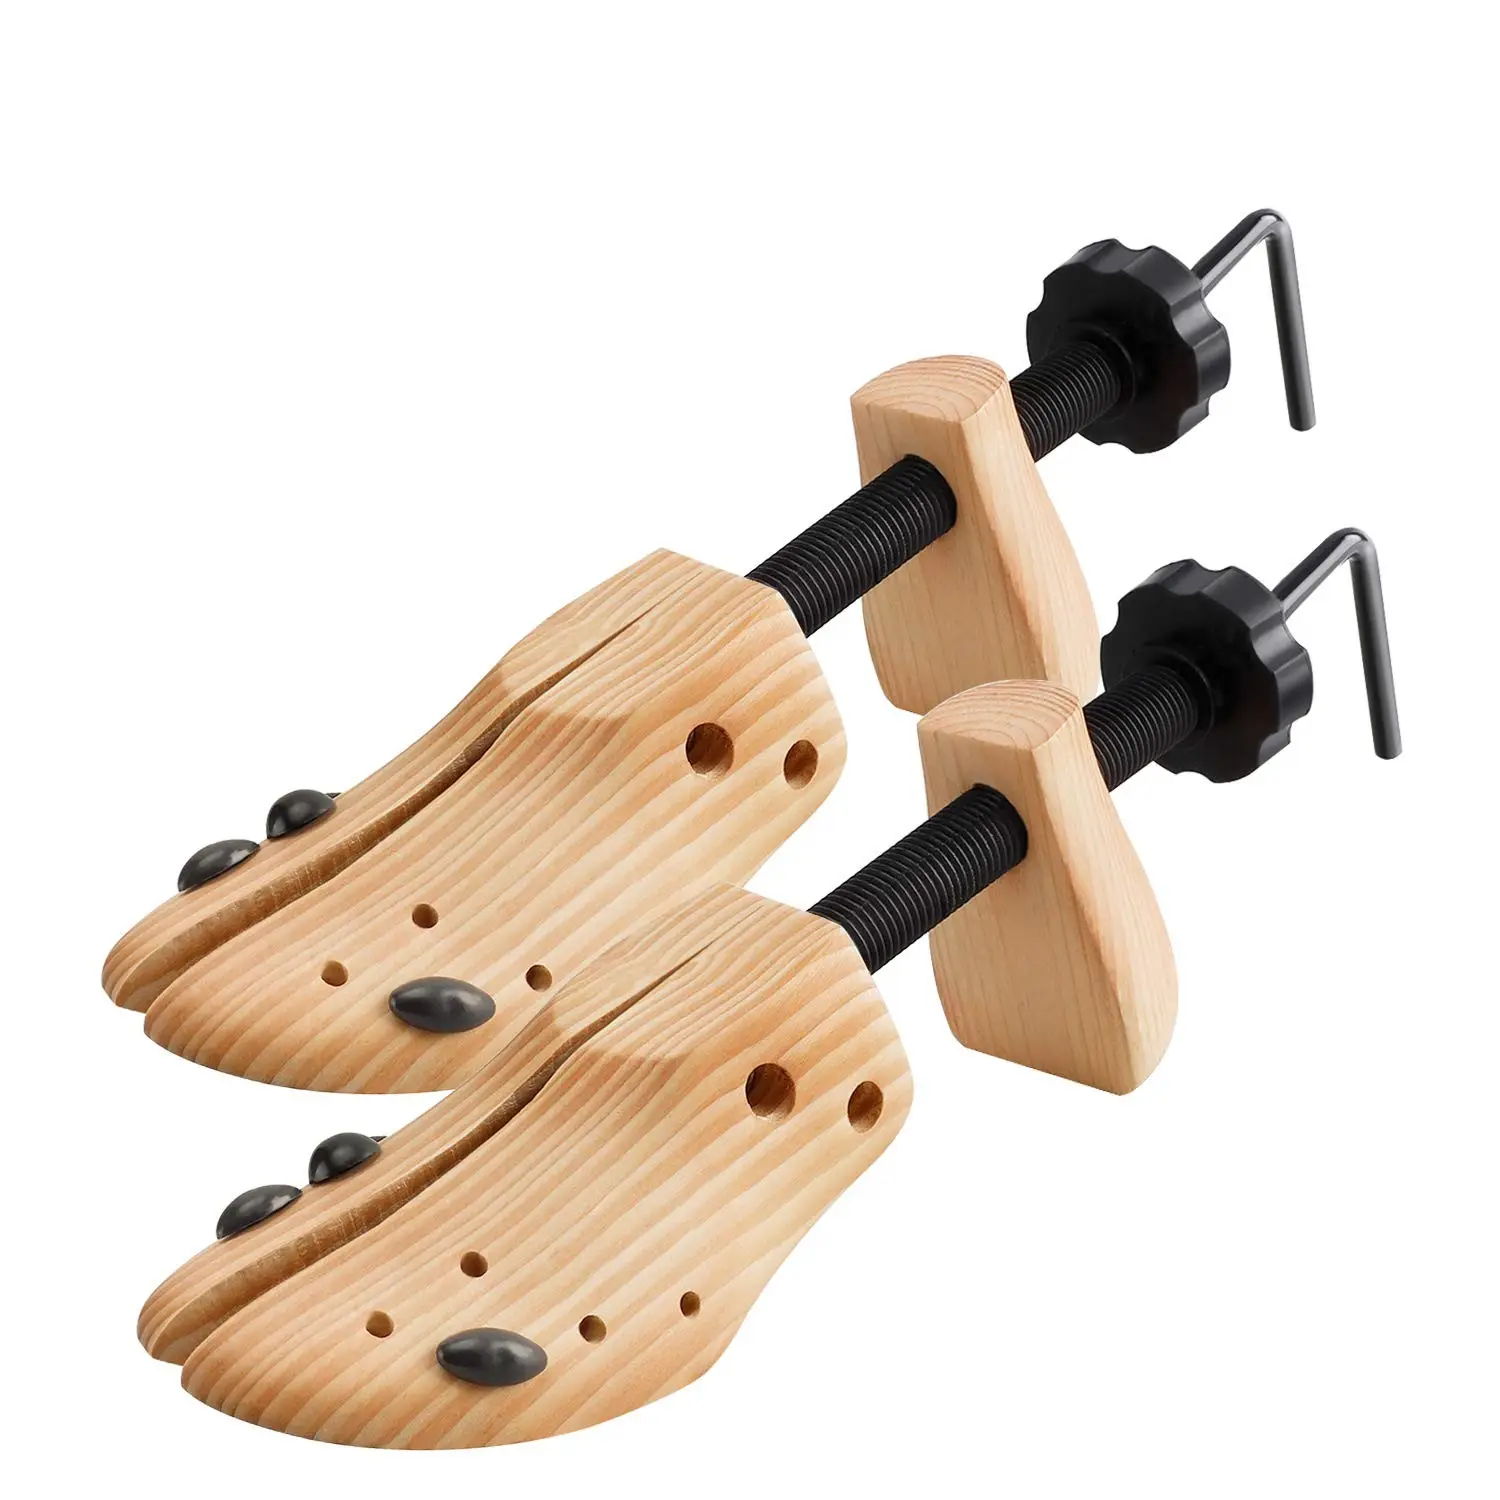 2 Way Shoe Stretcher -Adjustable Large Size for Men and Women